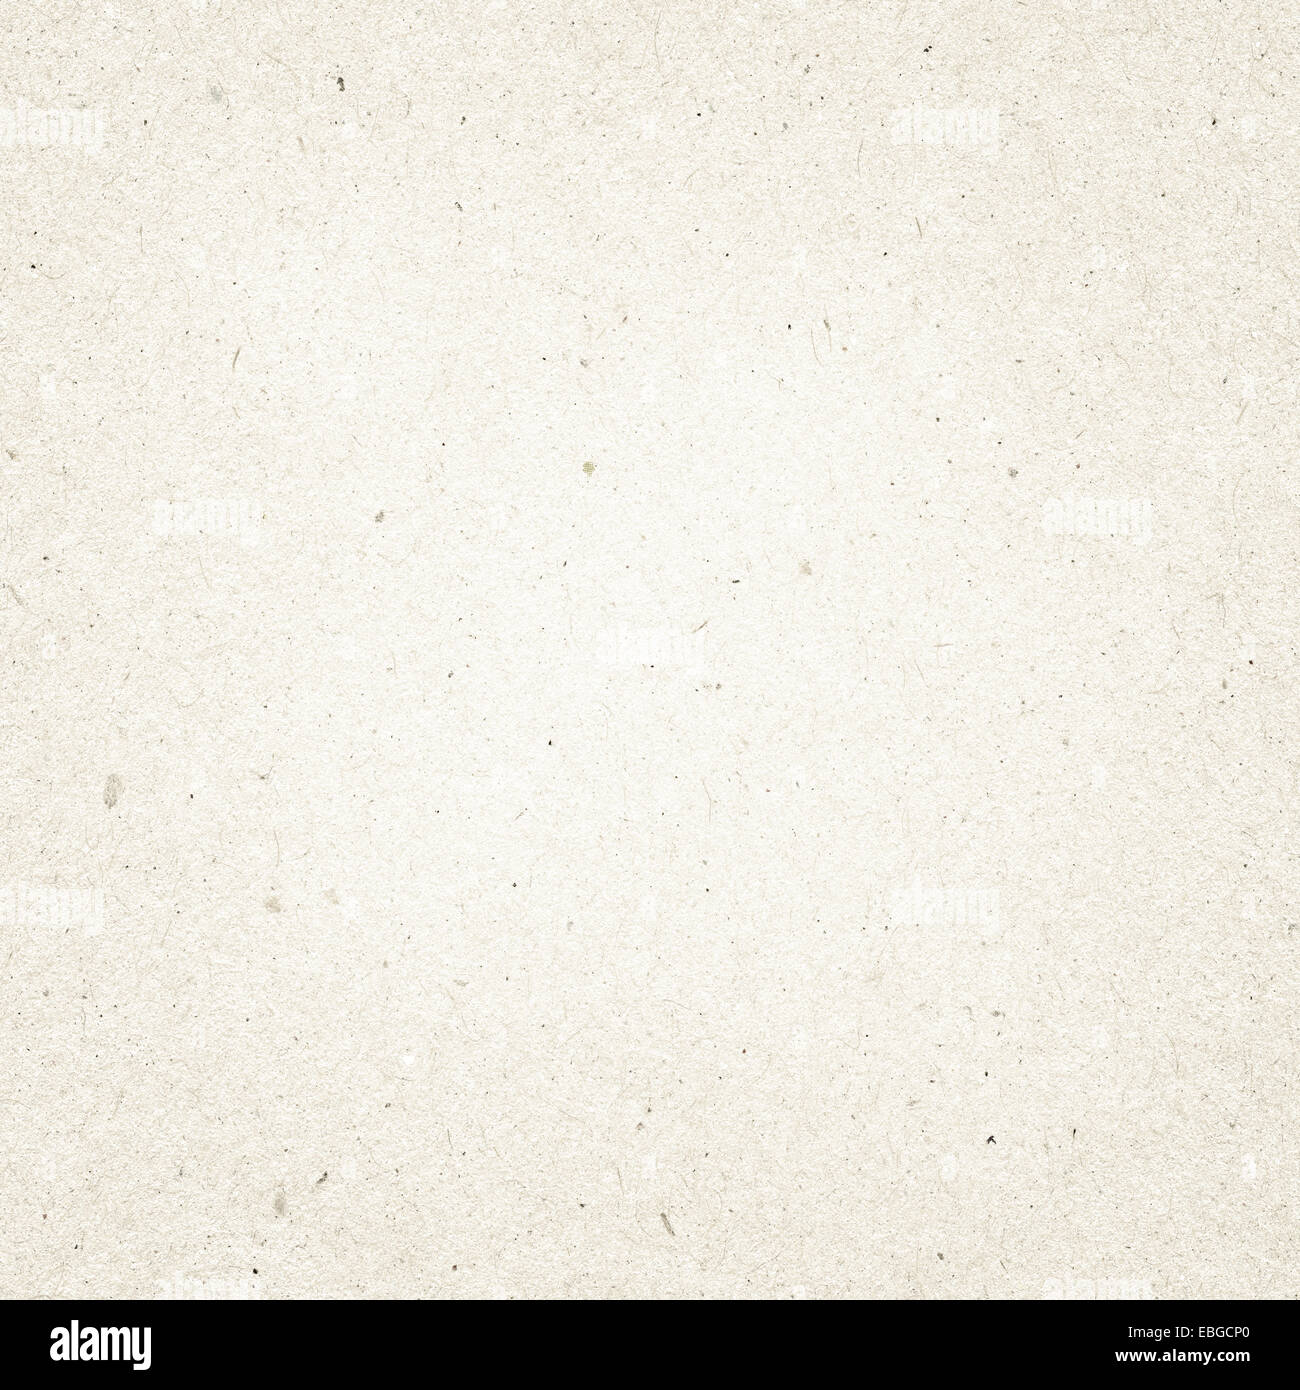 Grey recycled paper texture Stock Photo